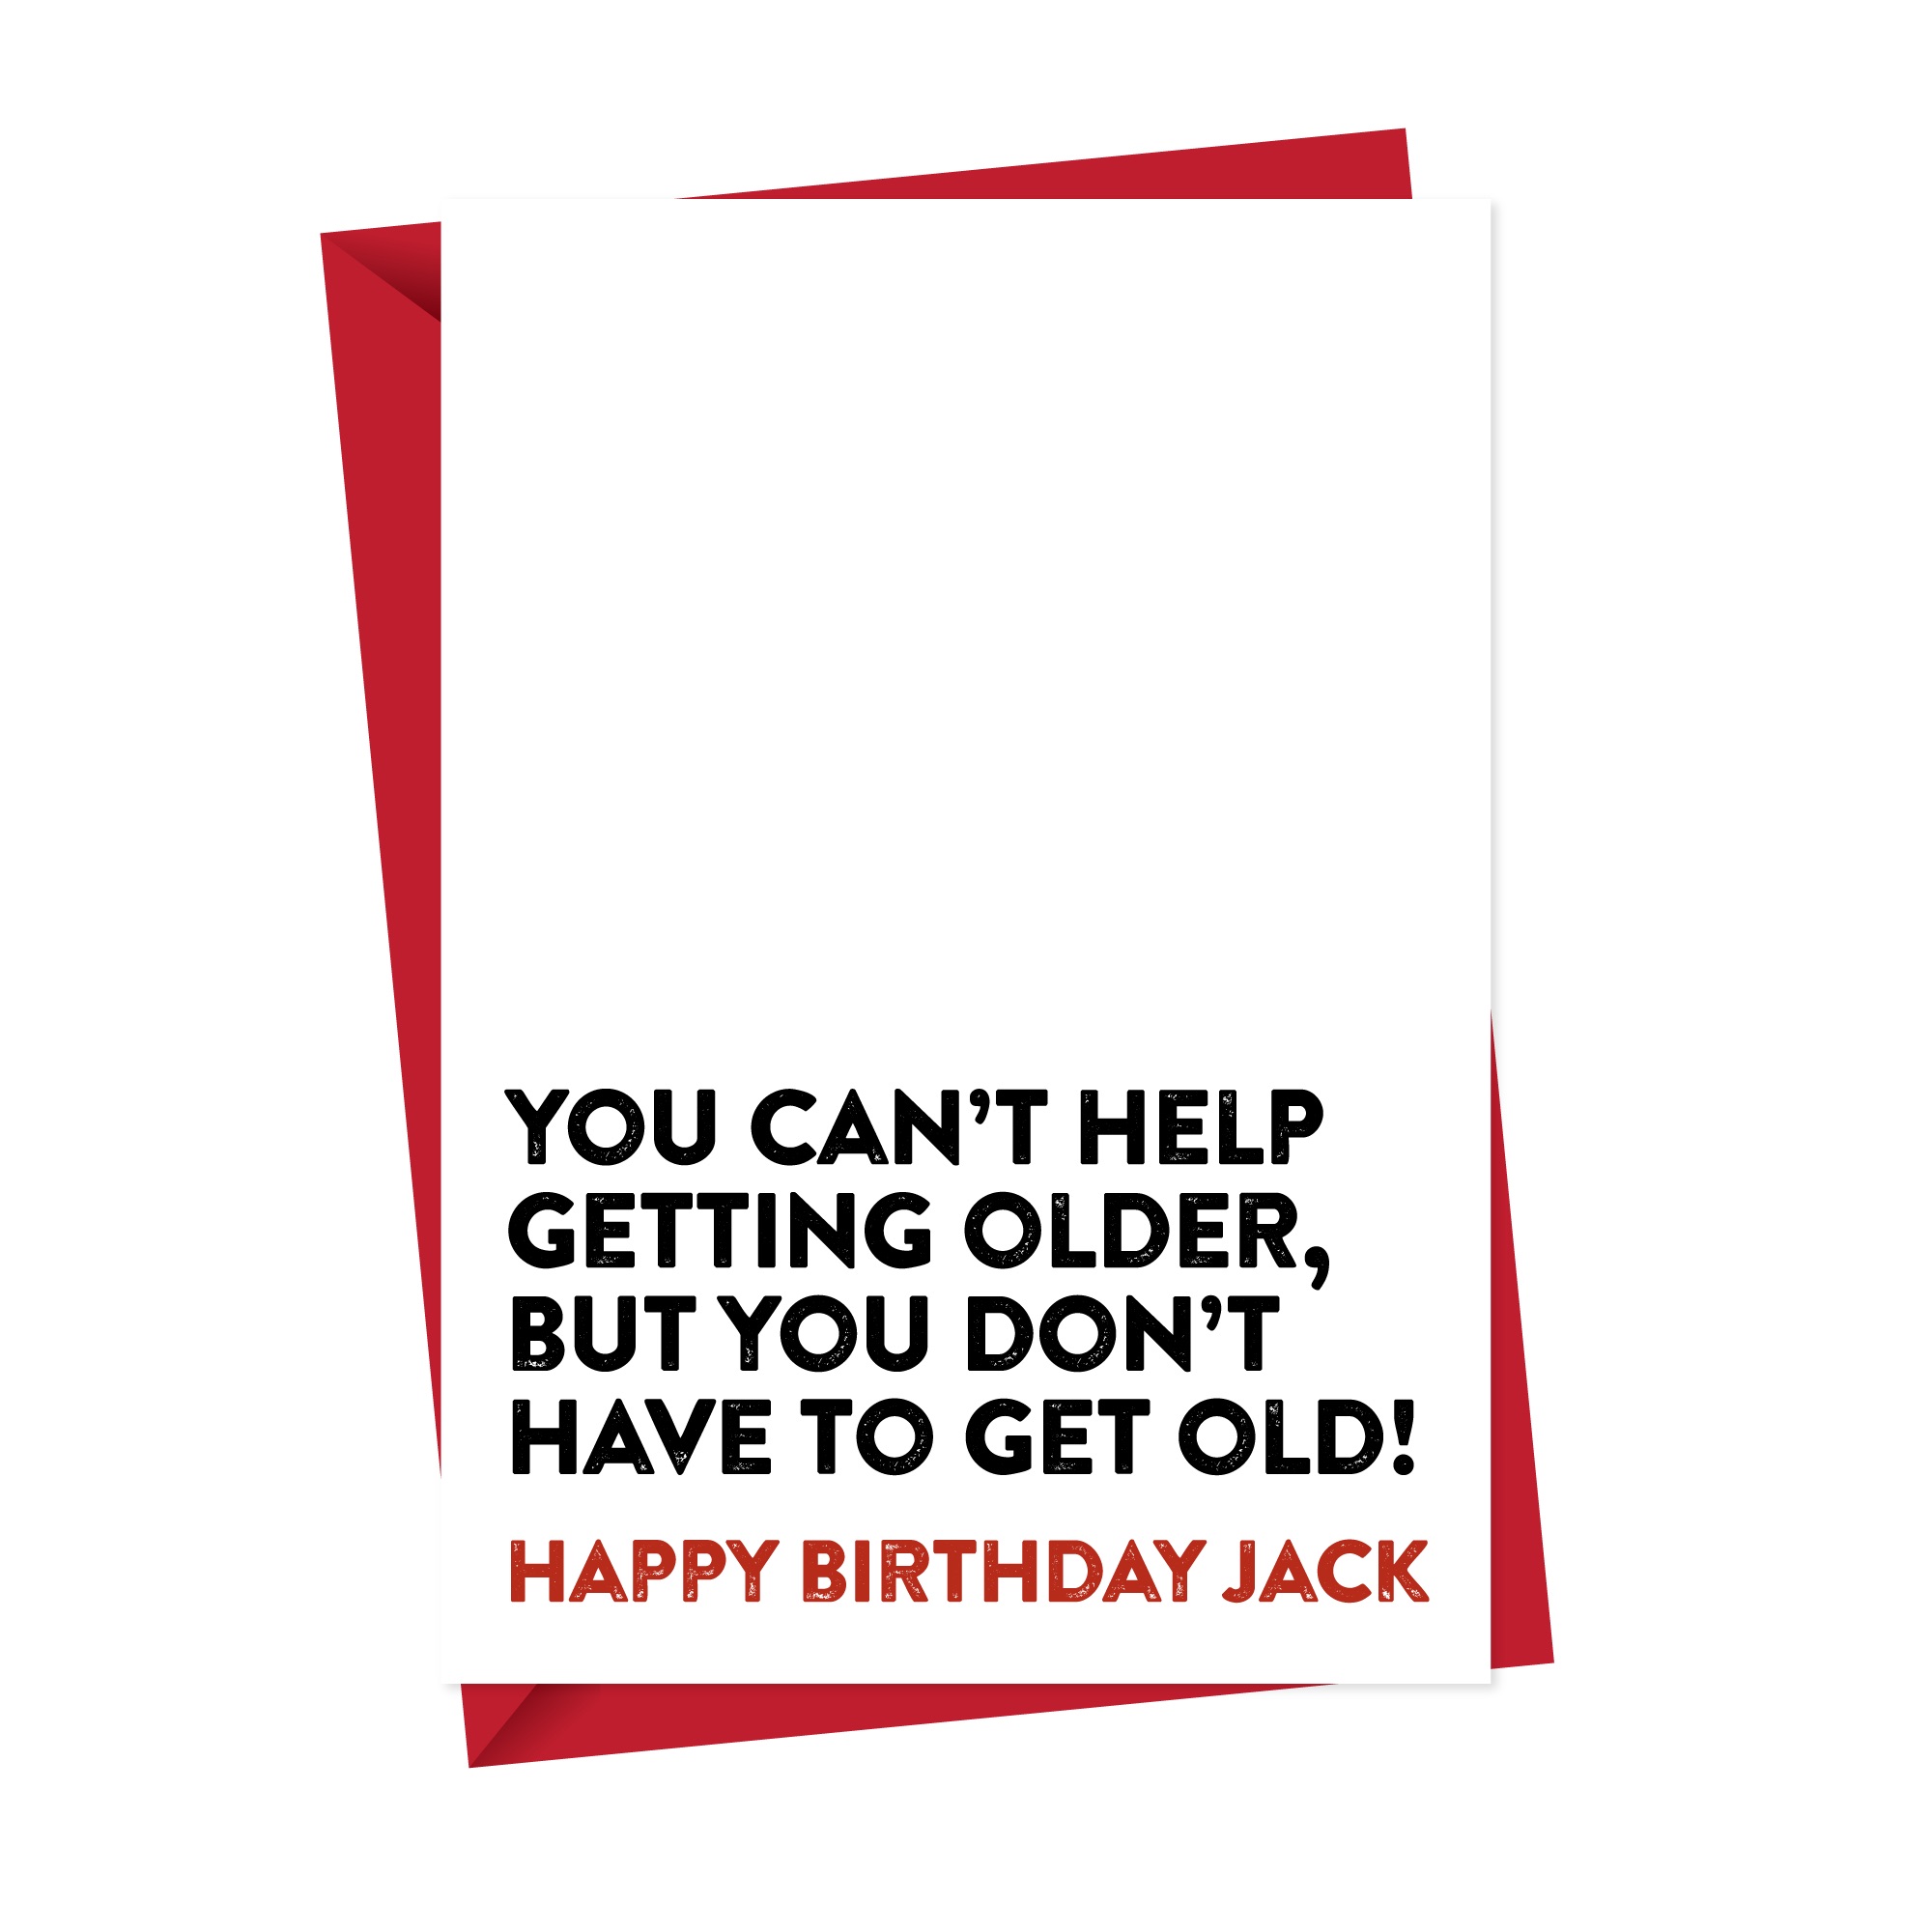 Can't Help Getting Older Funny Birthday Card